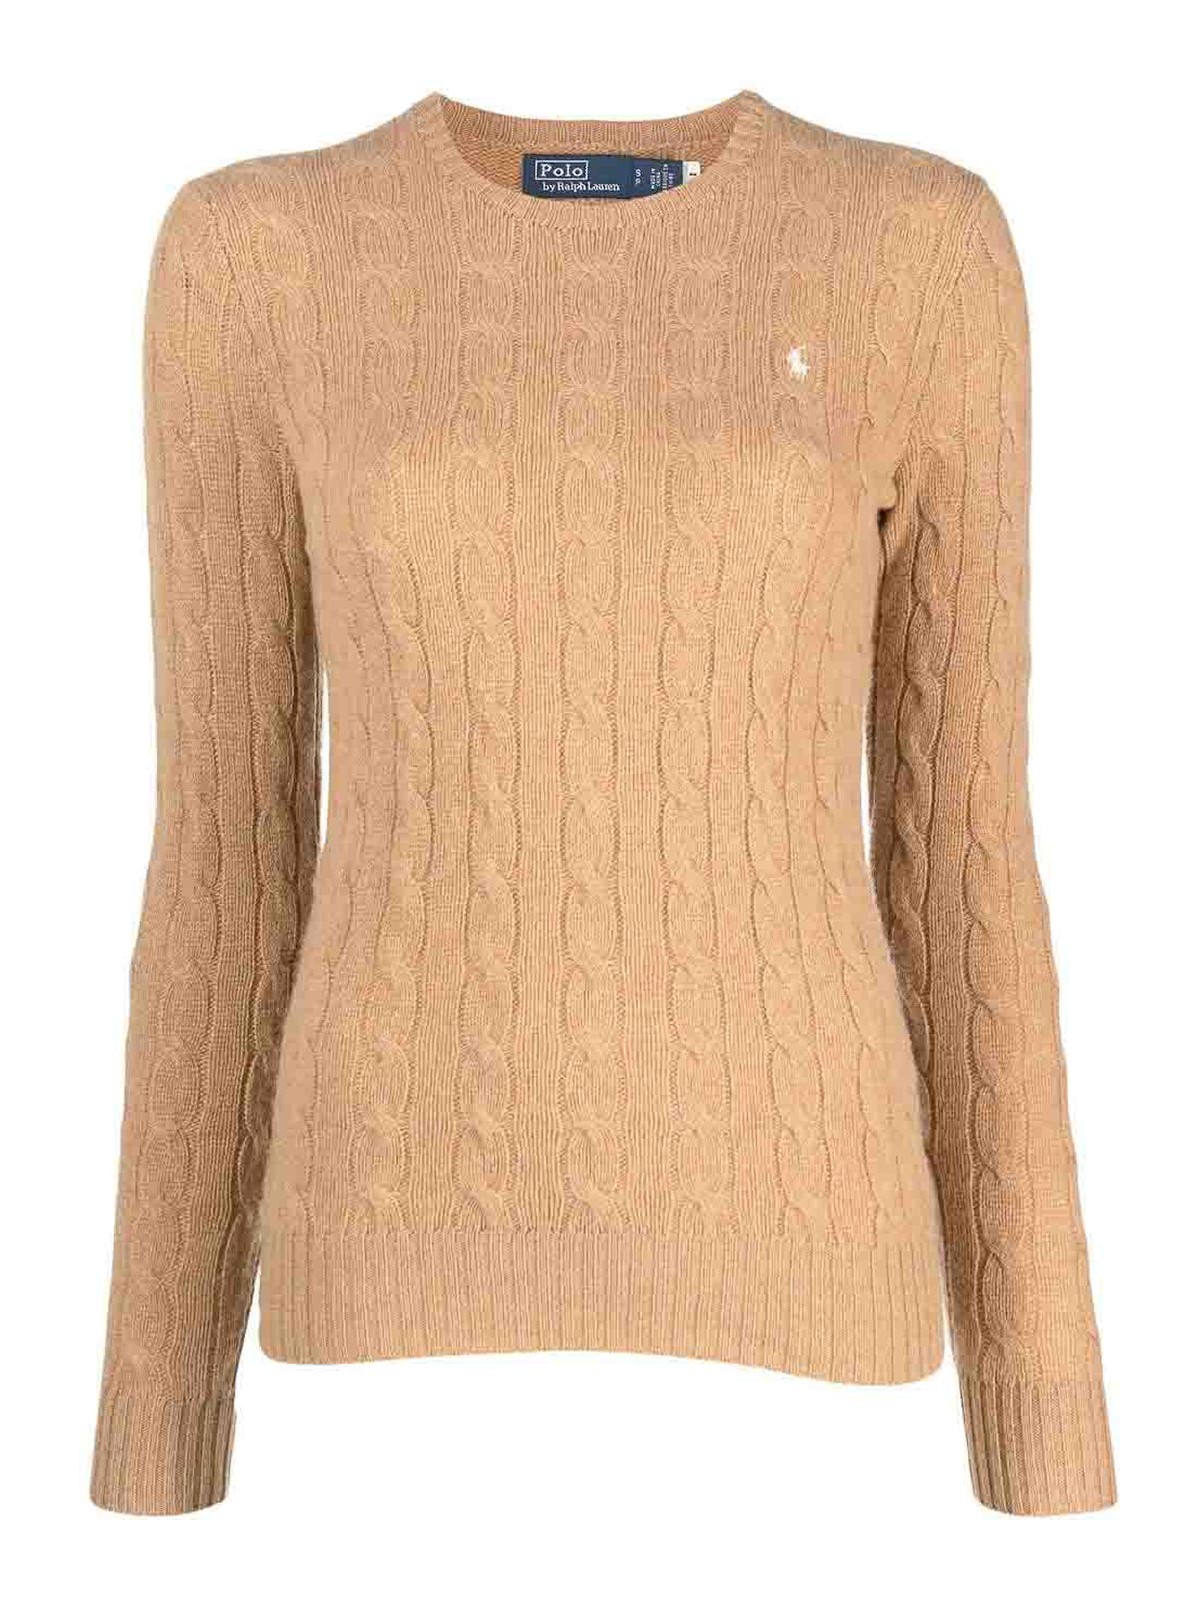 Polo Ralph Lauren Brown Cable-knit Jumper